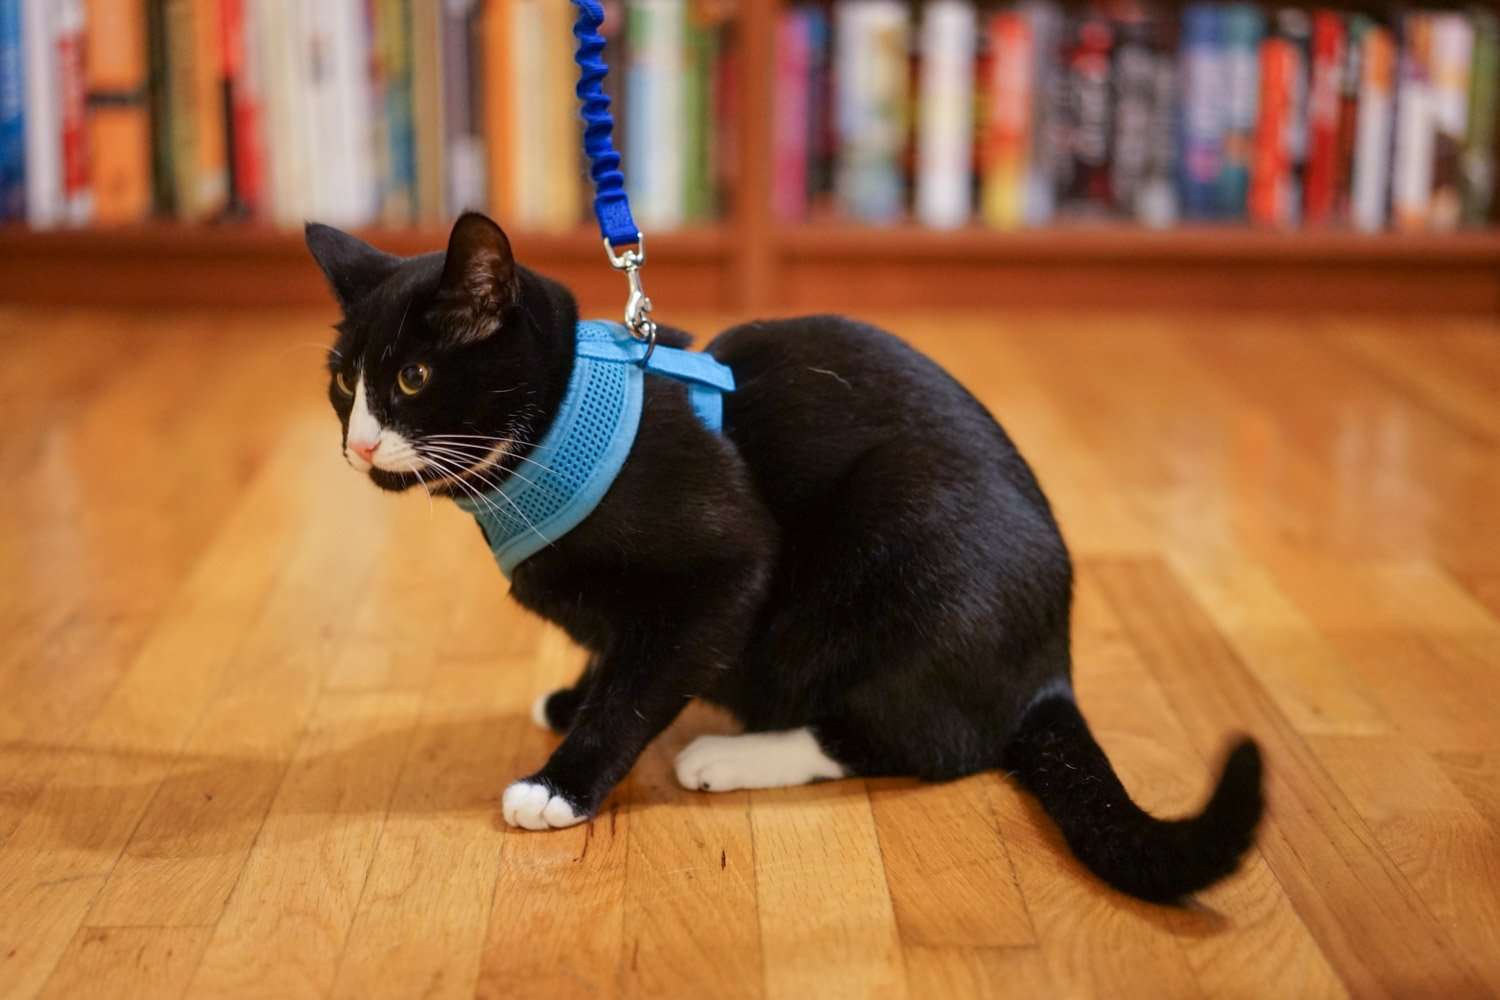 Train your cat to walk on a leash â Adventure Cats